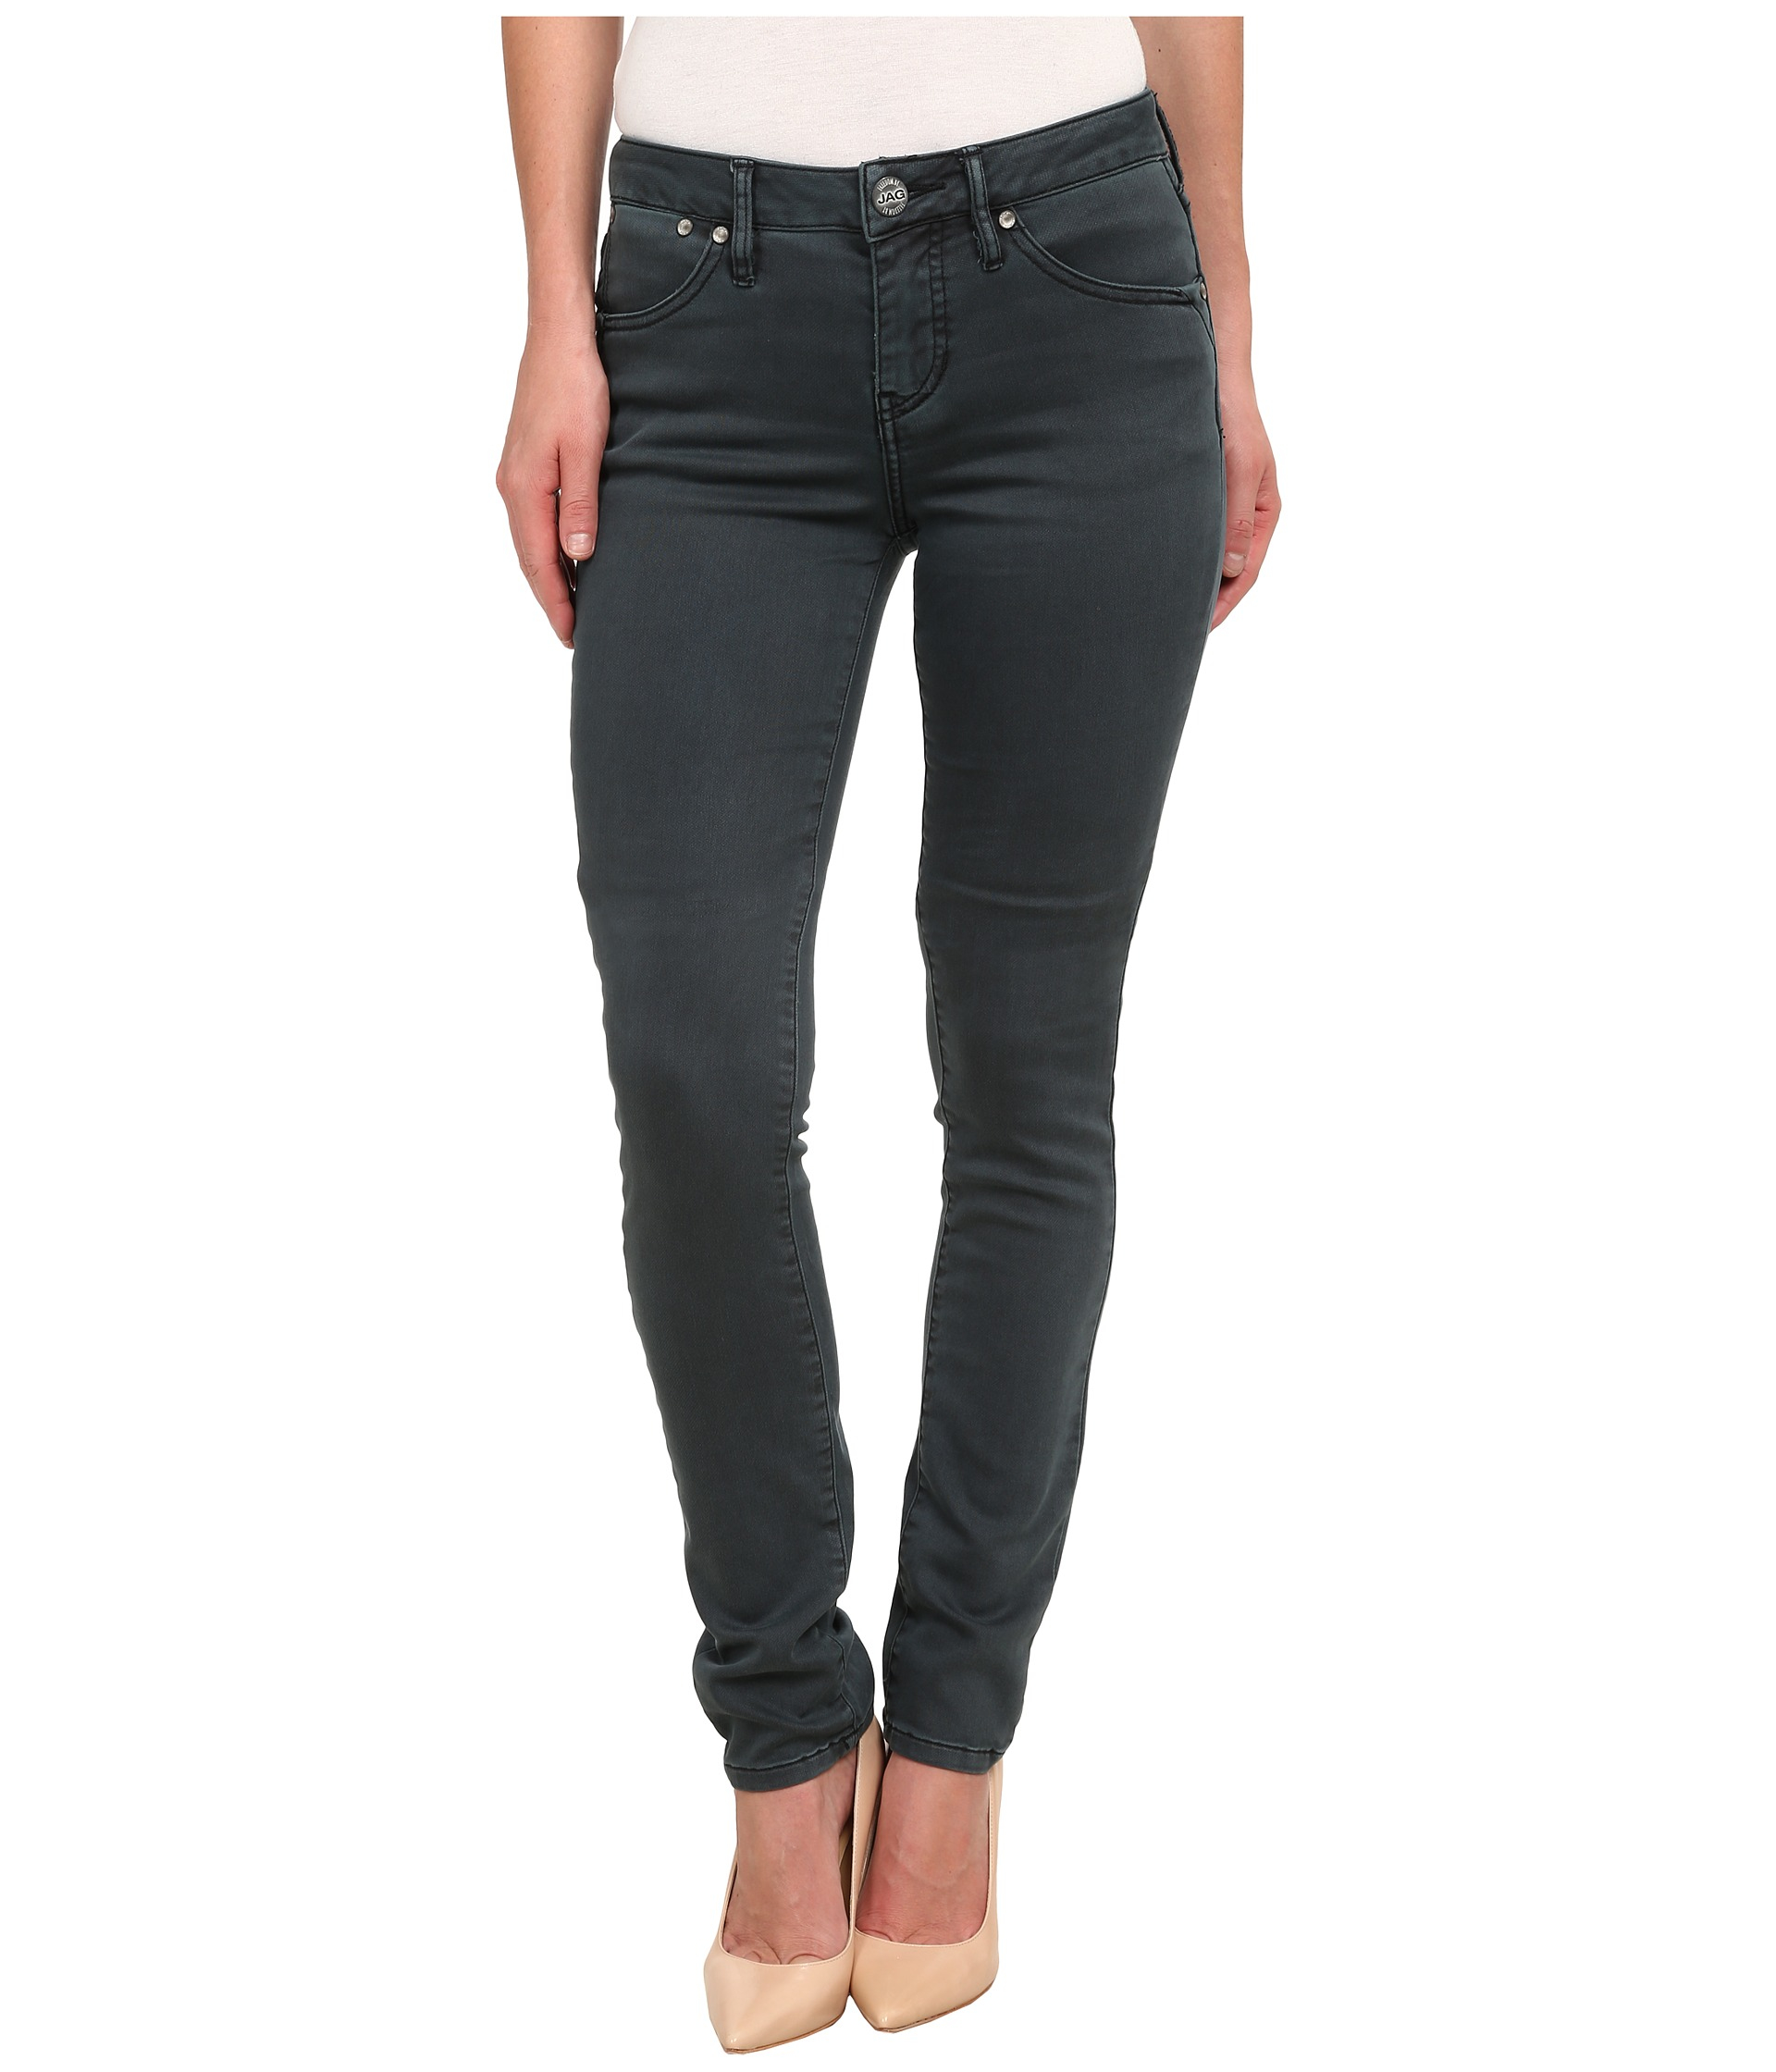 Lyst - Jag Jeans Janette Mid Rise Slim Knit Denim In Moody in Gray